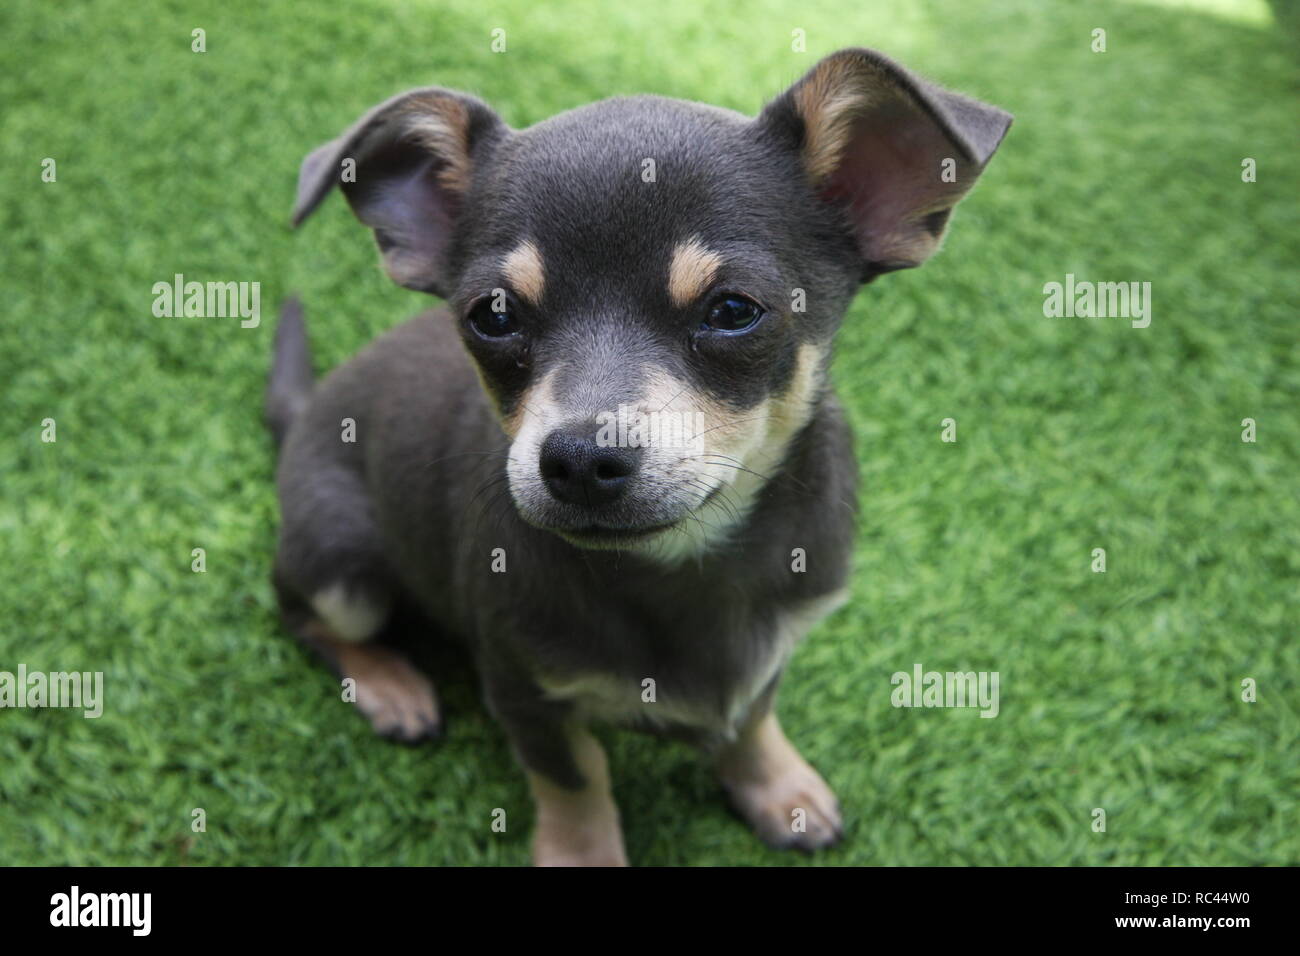 Chihuahua Puppy with Big Ears Sitting on the Grass Stock Photo